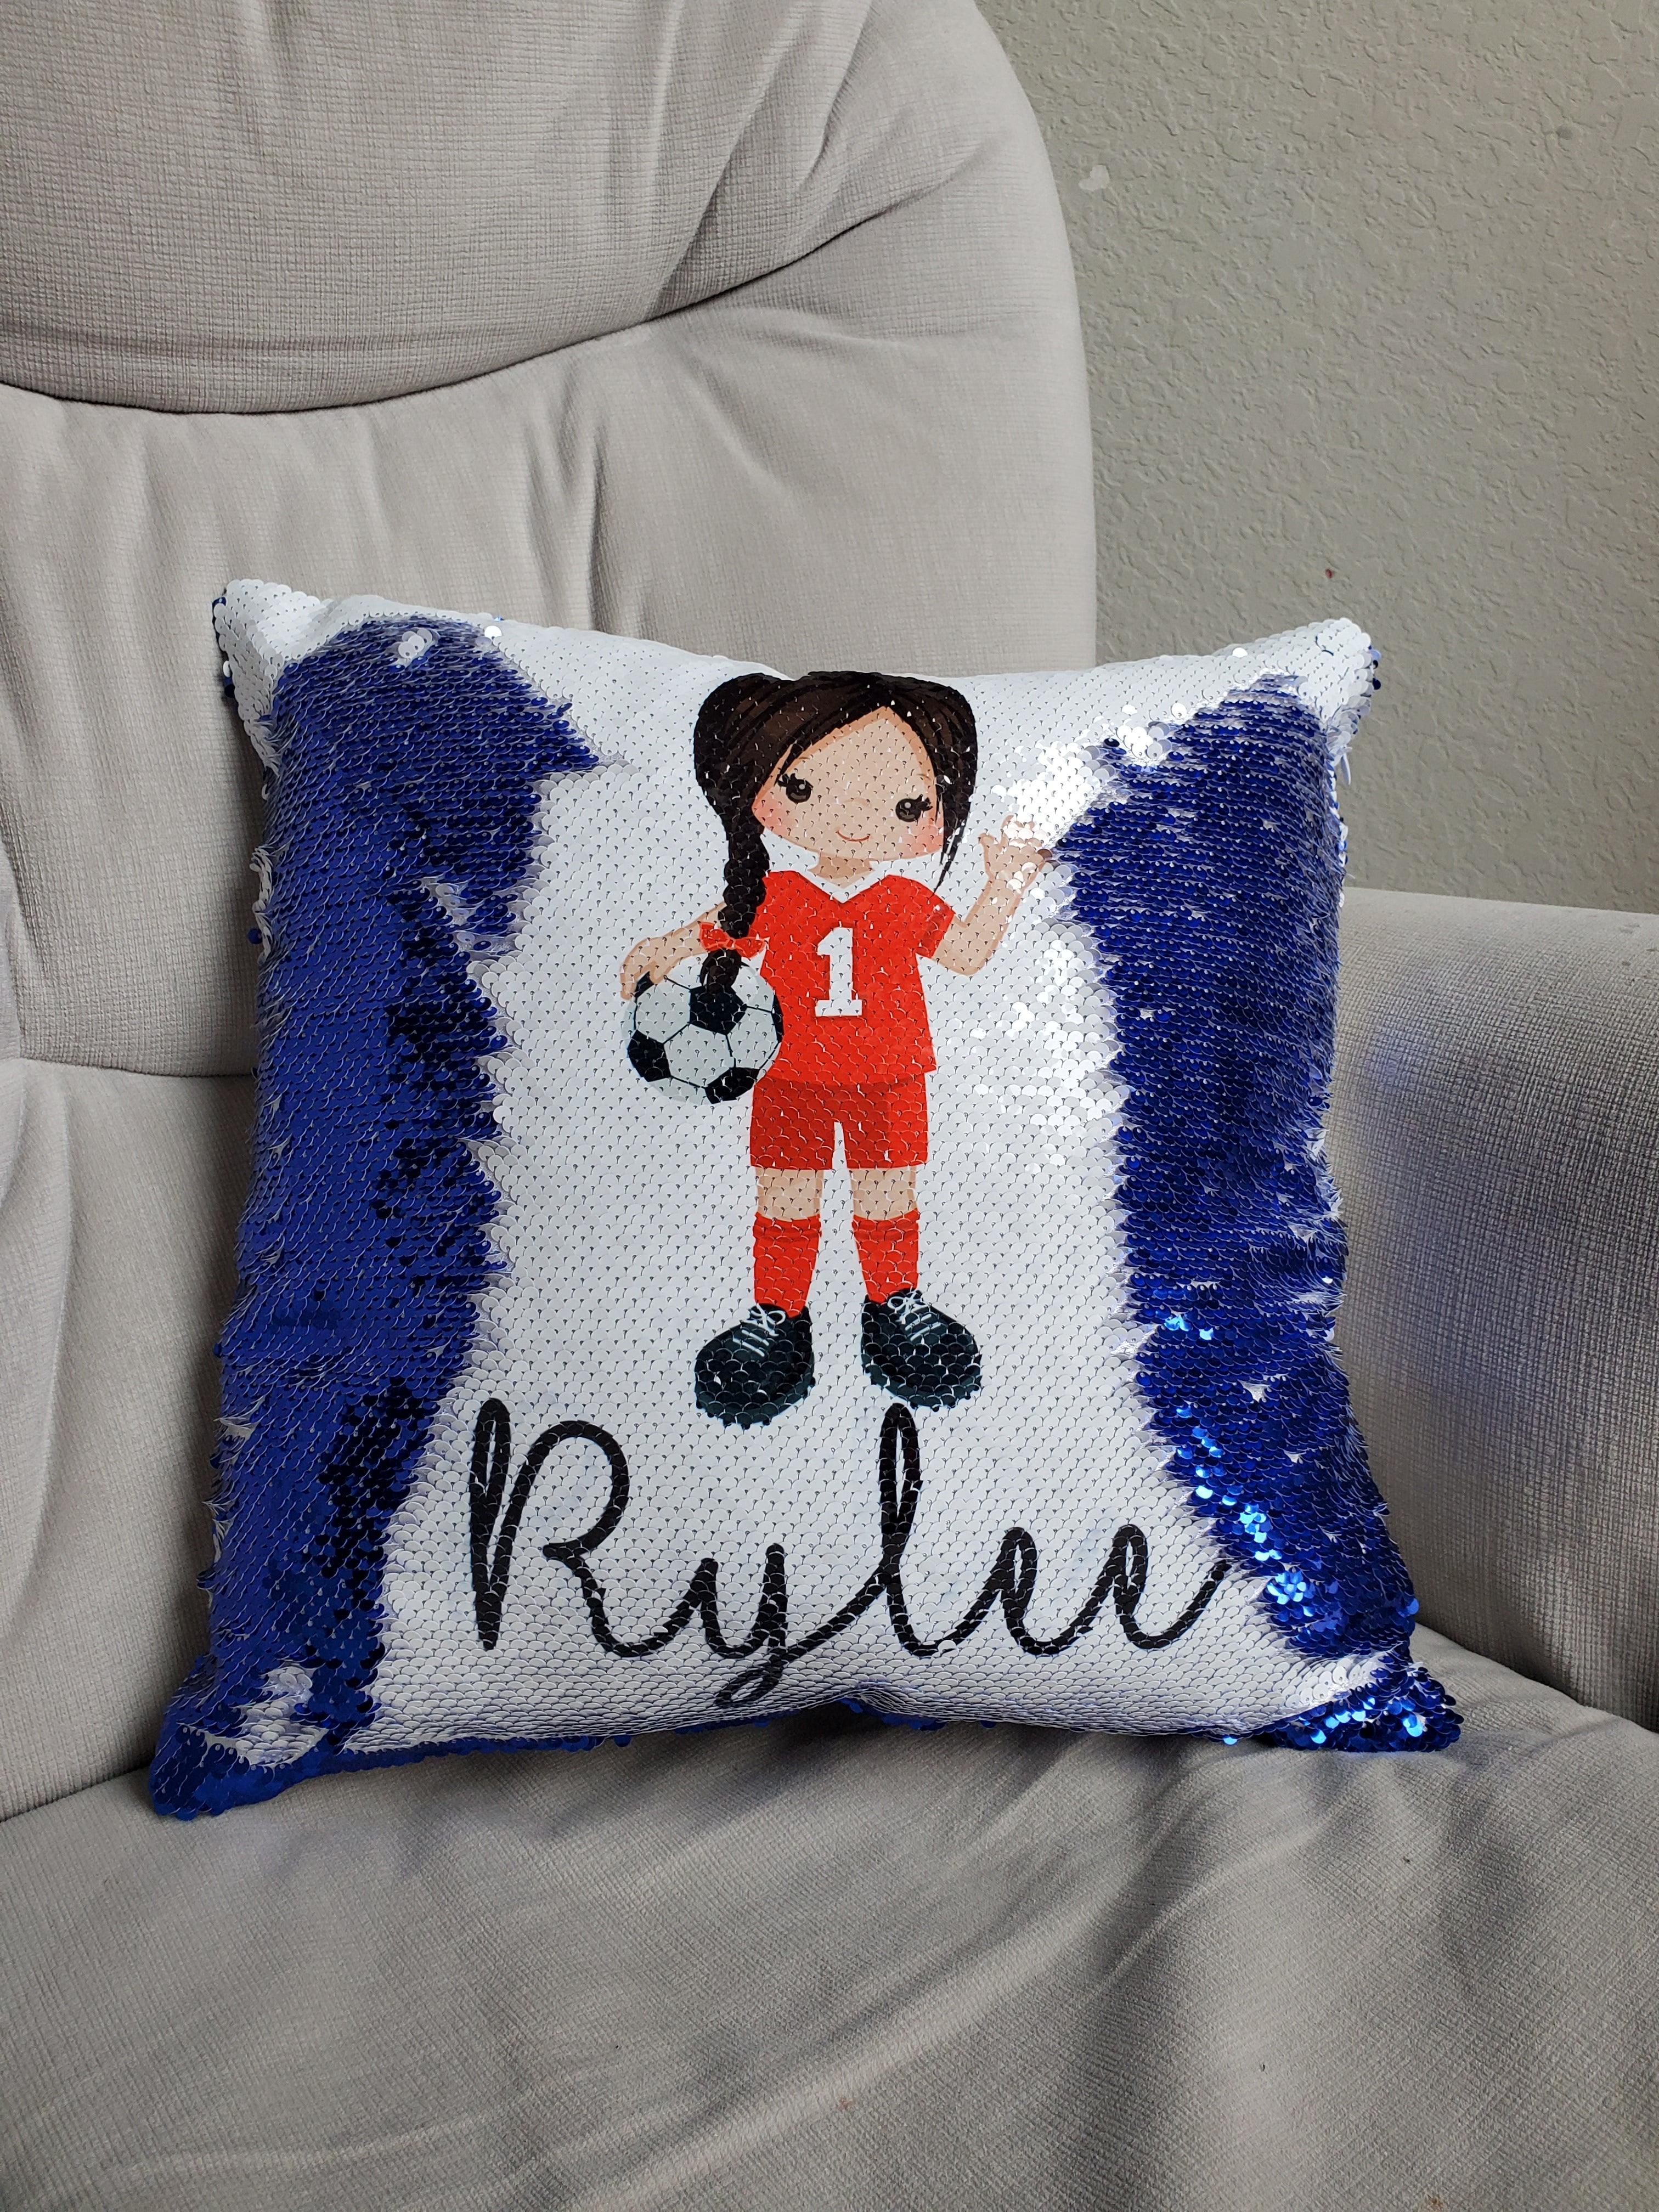  Soccer Gift for Girls or Boys , Soccer Decor AllStar Sports Gift | Kids SleepOver Party or Room Decor Pillow,  Birthday Gift for Girls, Pillow case personalized Sequin Throw Pillowcase Custom Reversible Pillow Decorative Cushion Pillow Cover ,Gift for child with Sensory Needs and or Autism | Gift for 5 year old Girls | Gift for Girls | Gift for 2 3 4 5 6 year old girls | Birthday Girl Gift | | Personalized Shirt for Girls | Gift for Birthday Theme Party Suplies